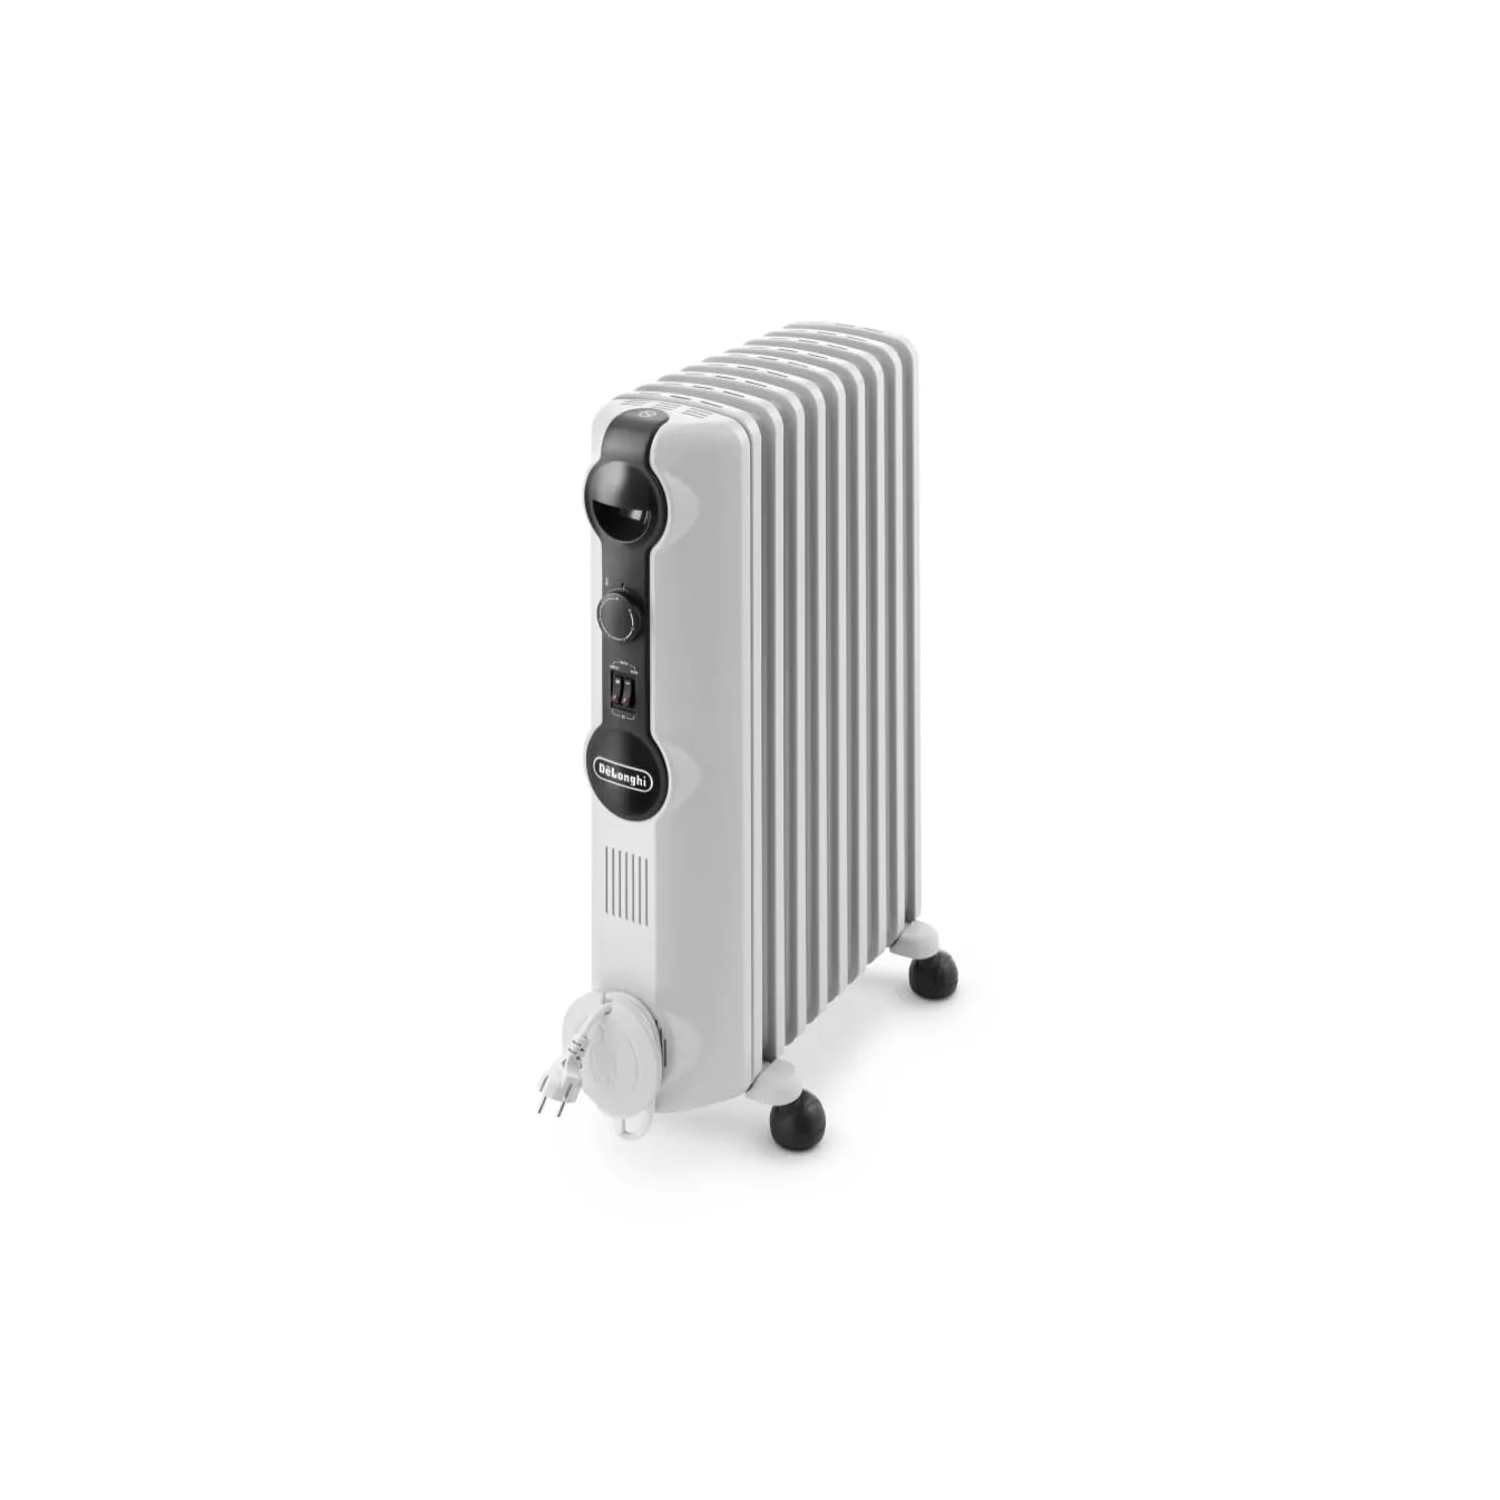 DeLonghi Radia-S 2.0kW Oil Filled Radiator with Thermostat & 5 Year Warranty